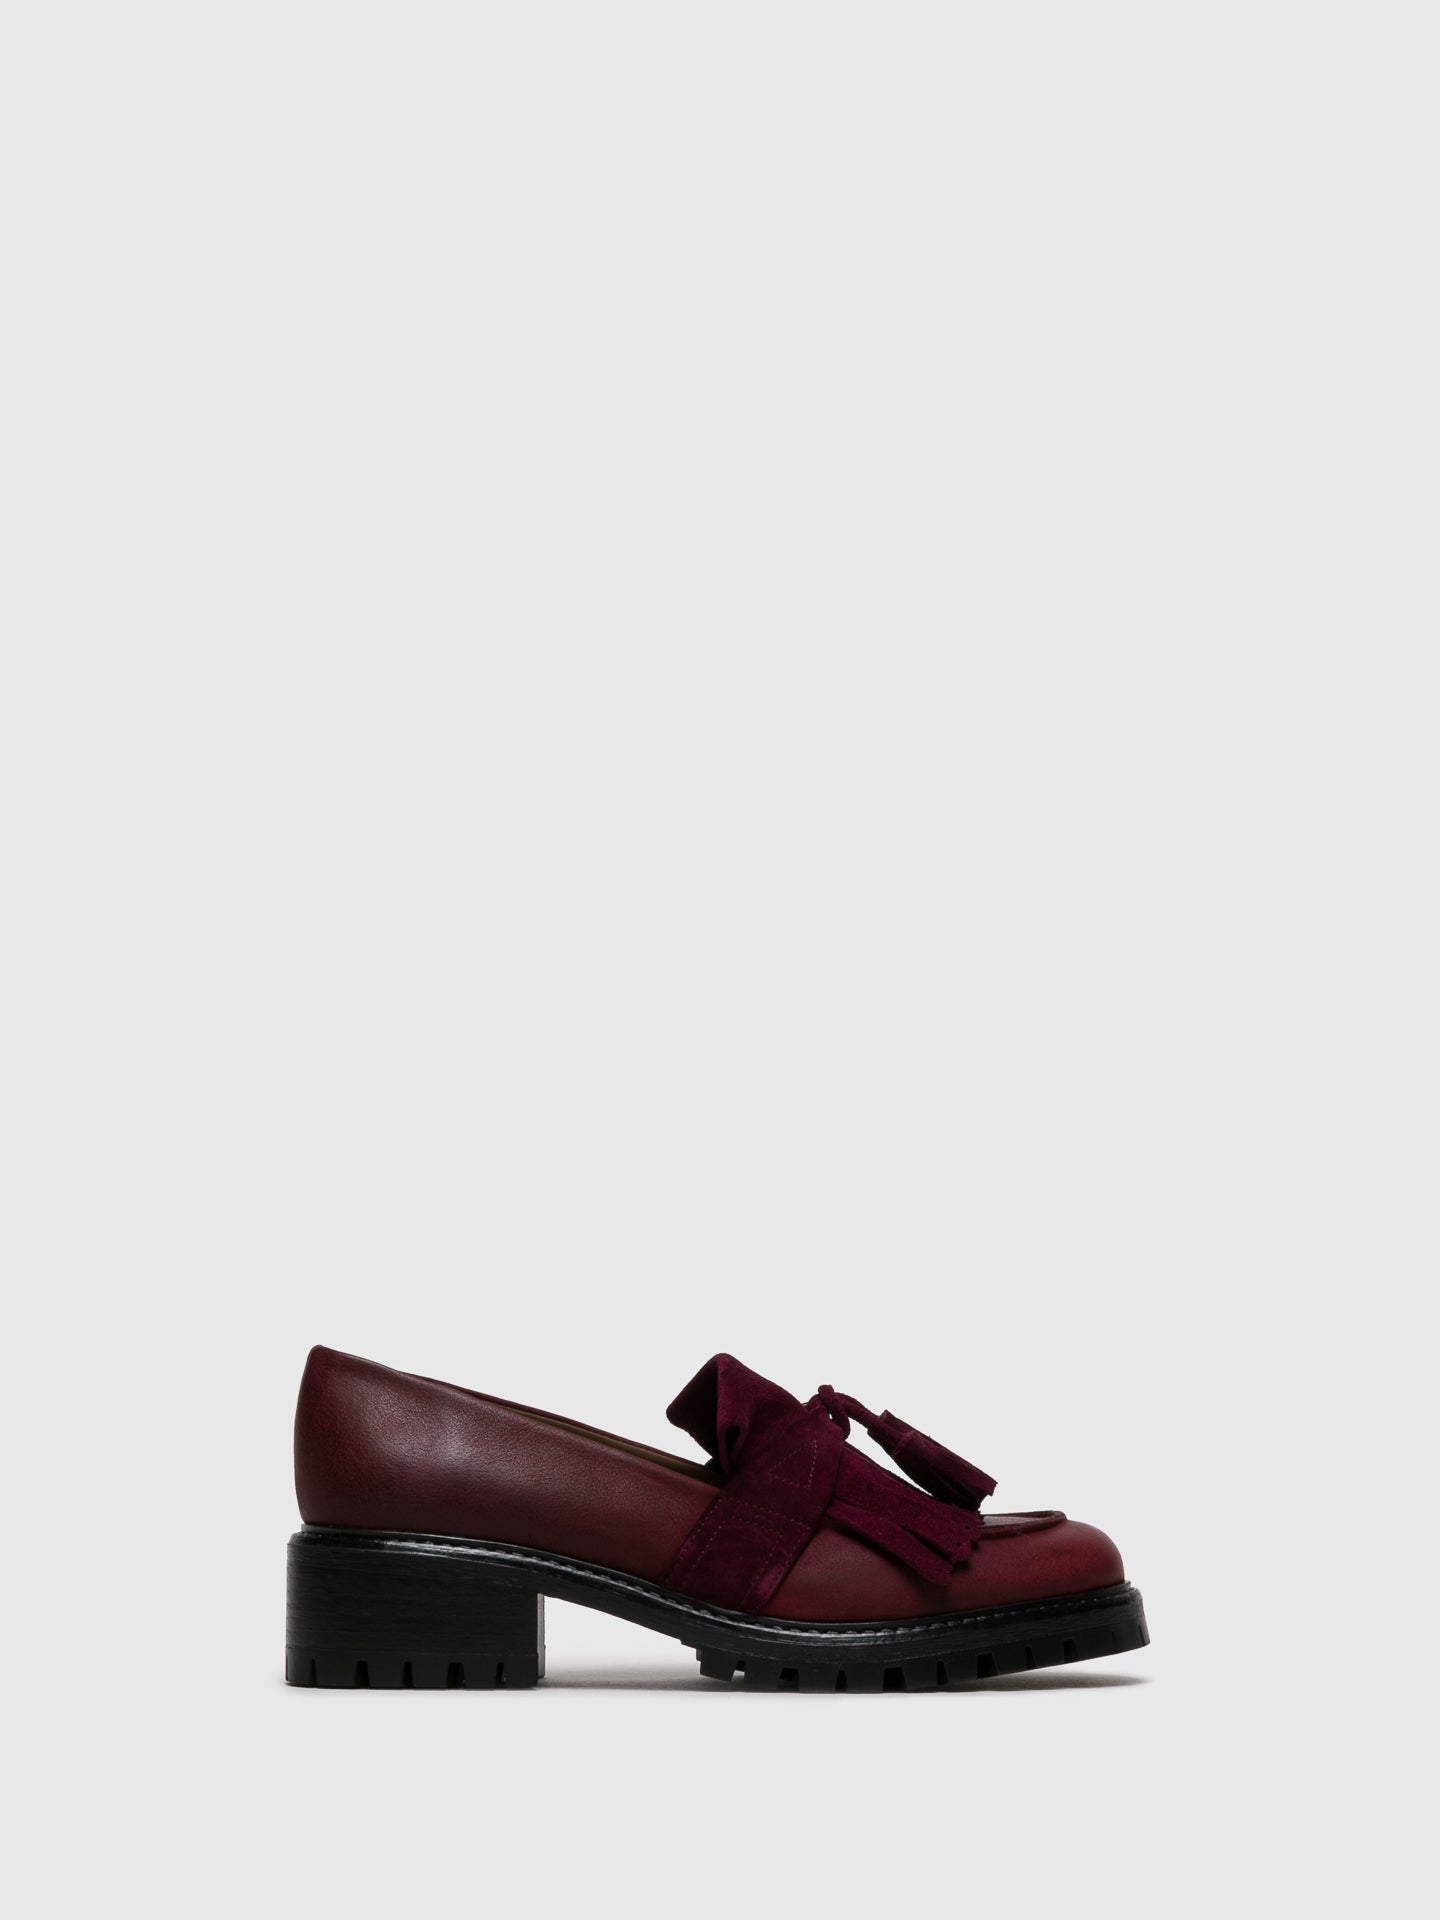 JJ Heitor DarkRed Loafers Shoes